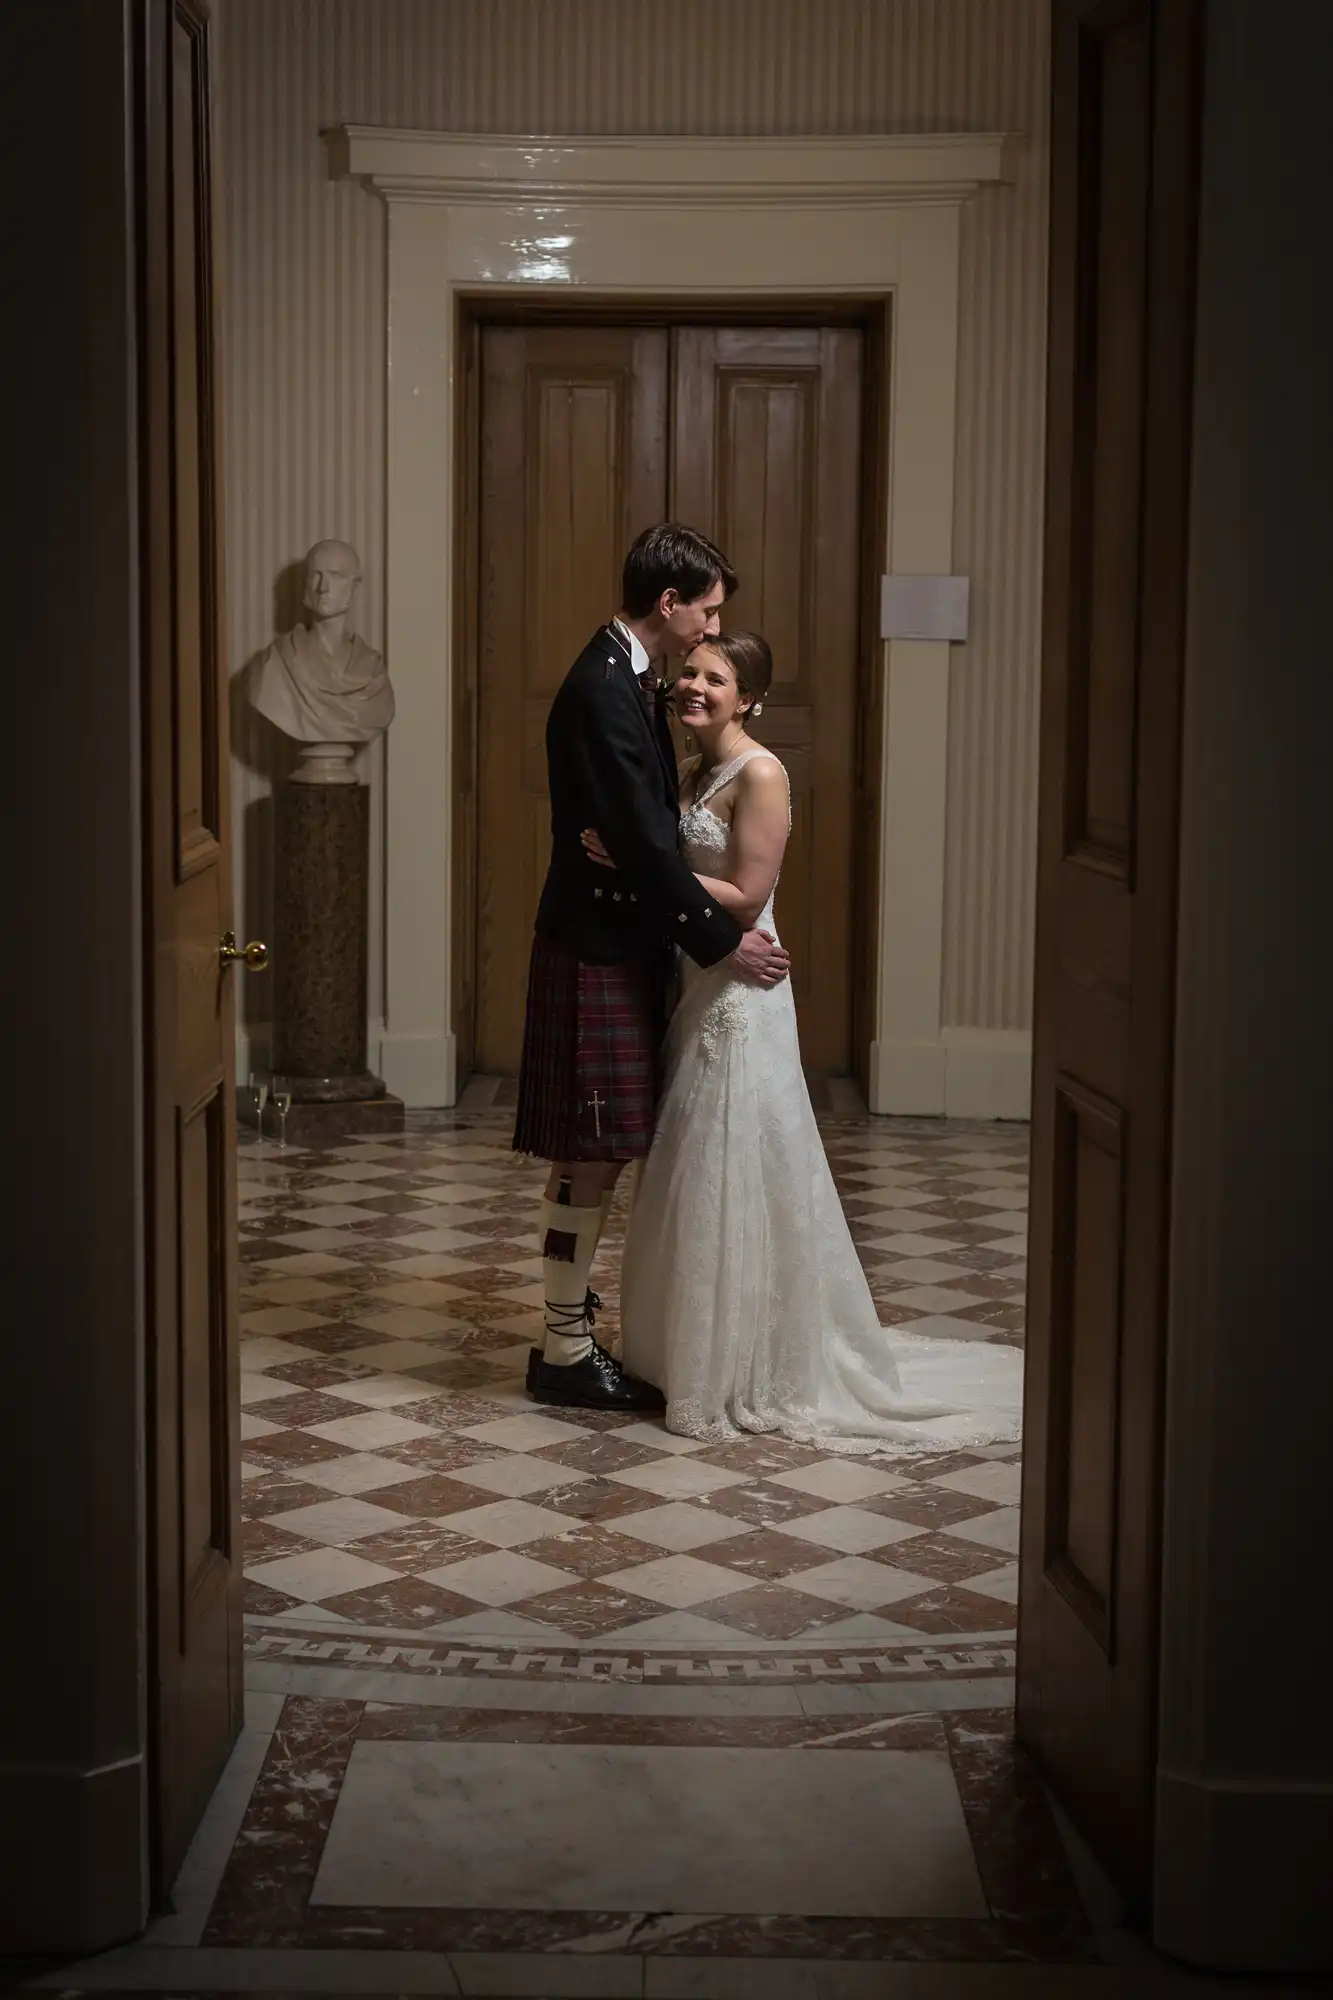 A bride and groom embracing in a hallway, the groom wearing a kilt and the bride in a lace gown, surrounded by elegant architectural details.